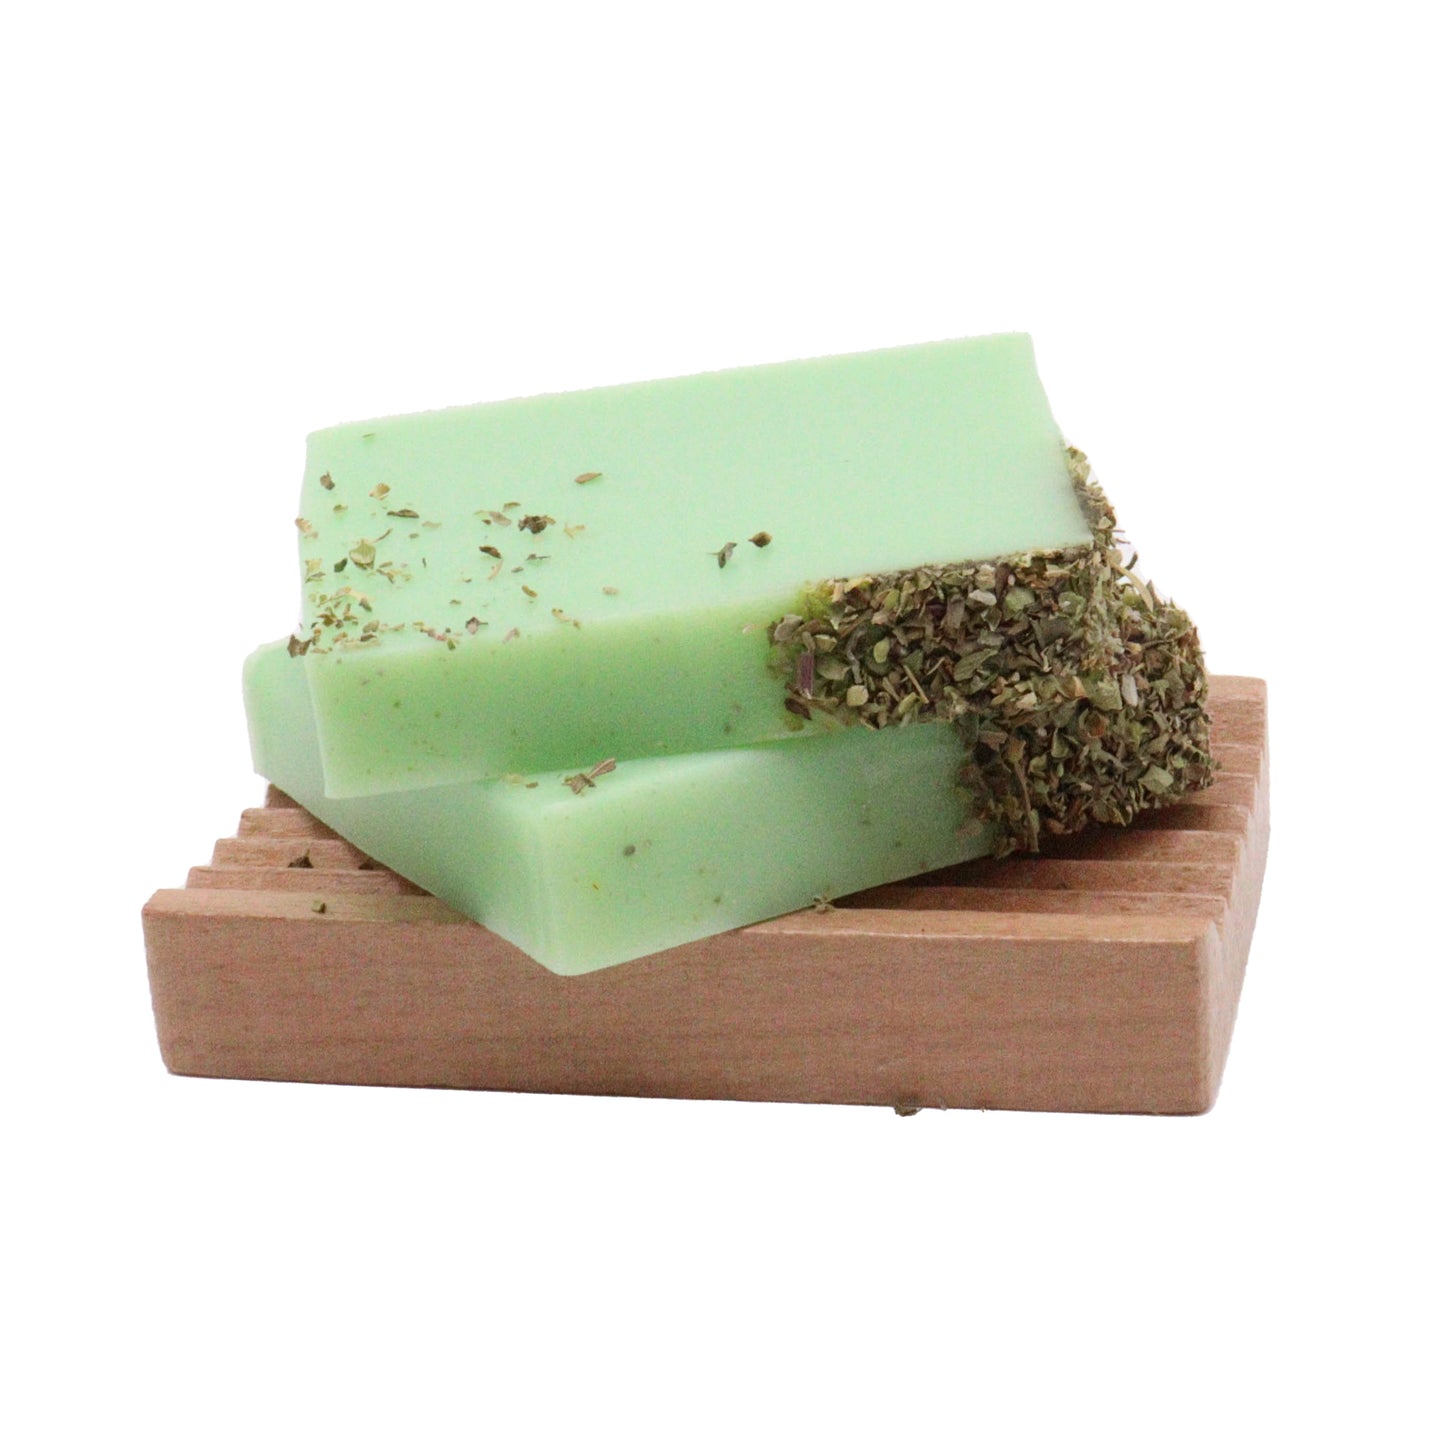 Revitalizing Herbal Remedy - Artisan Handcrafted Soap - Slice or Loaf - Cosmic Serenity Shop